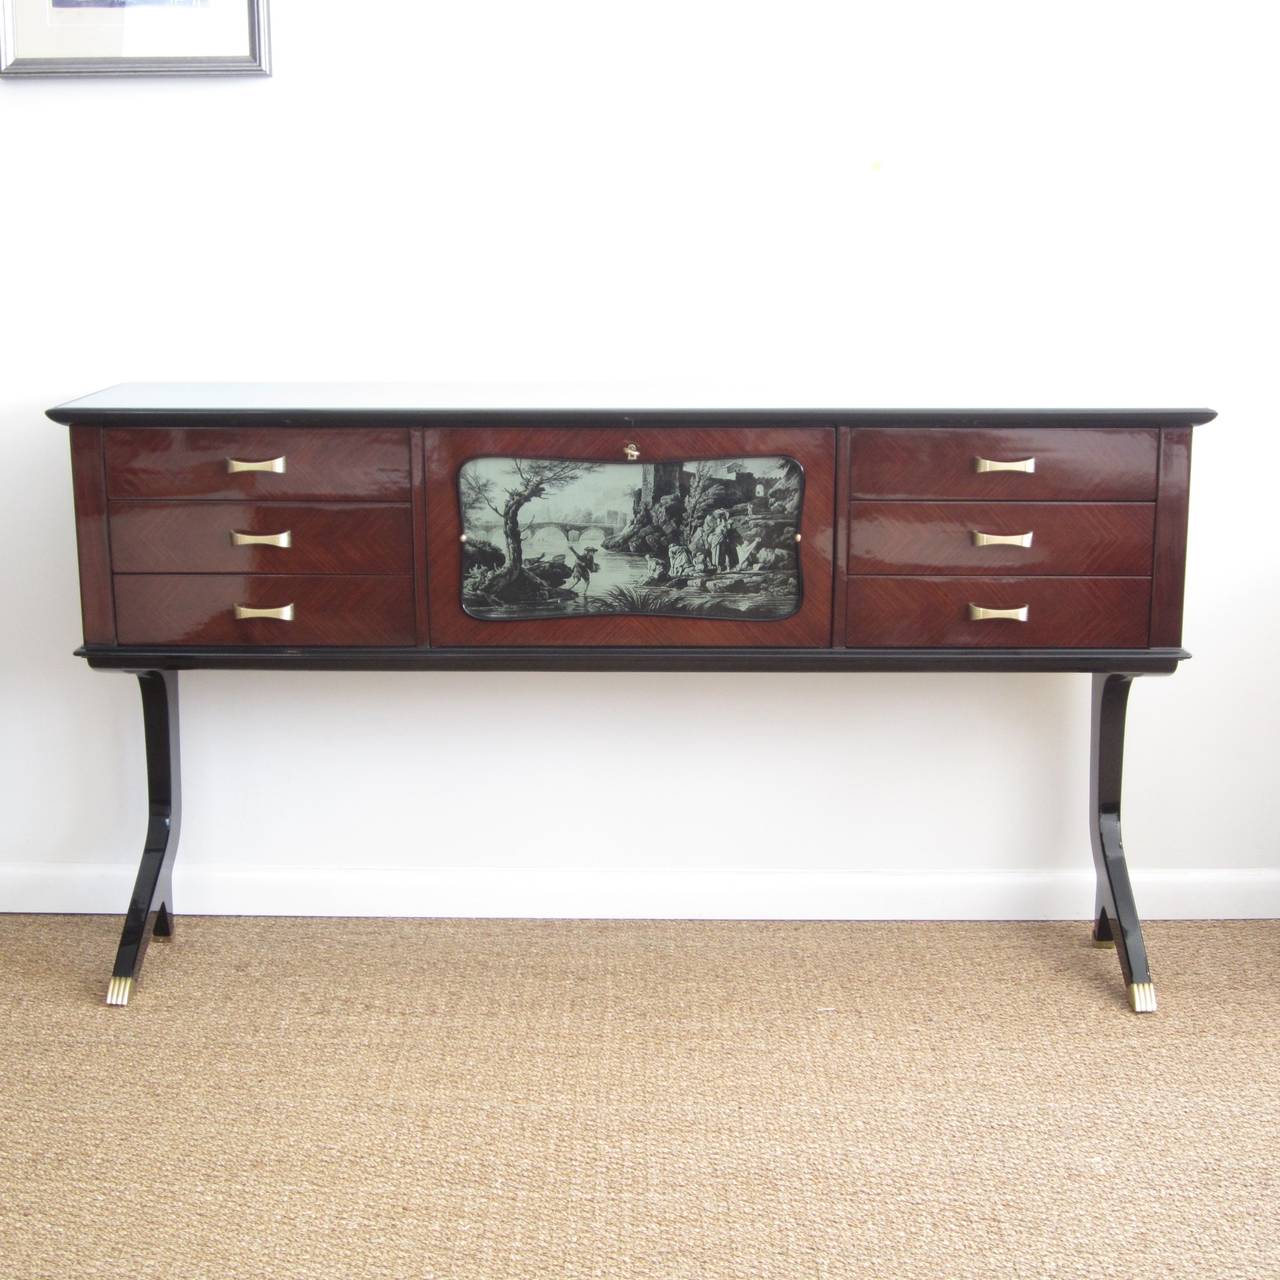 Tall Italian console in mahogany with reverse painted glass center panel. Drop down center door has original skeleton key and the inside is mirrored with small individual pieces. The long legs are split at the bottom and the fronts are capped. The